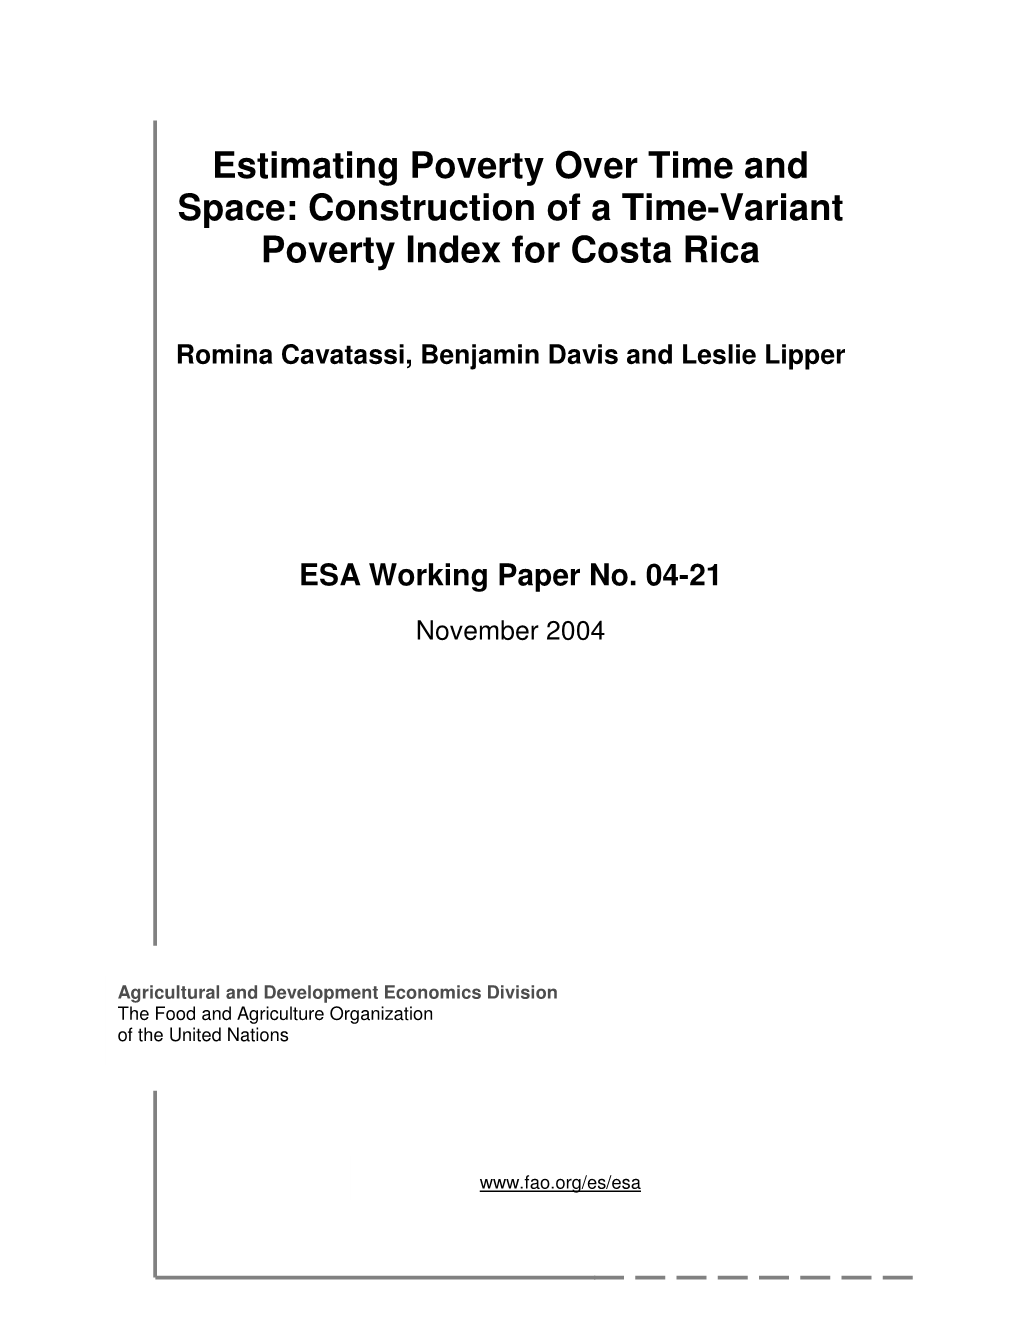 Construction of a Time-Variant Poverty Index for Costa Rica